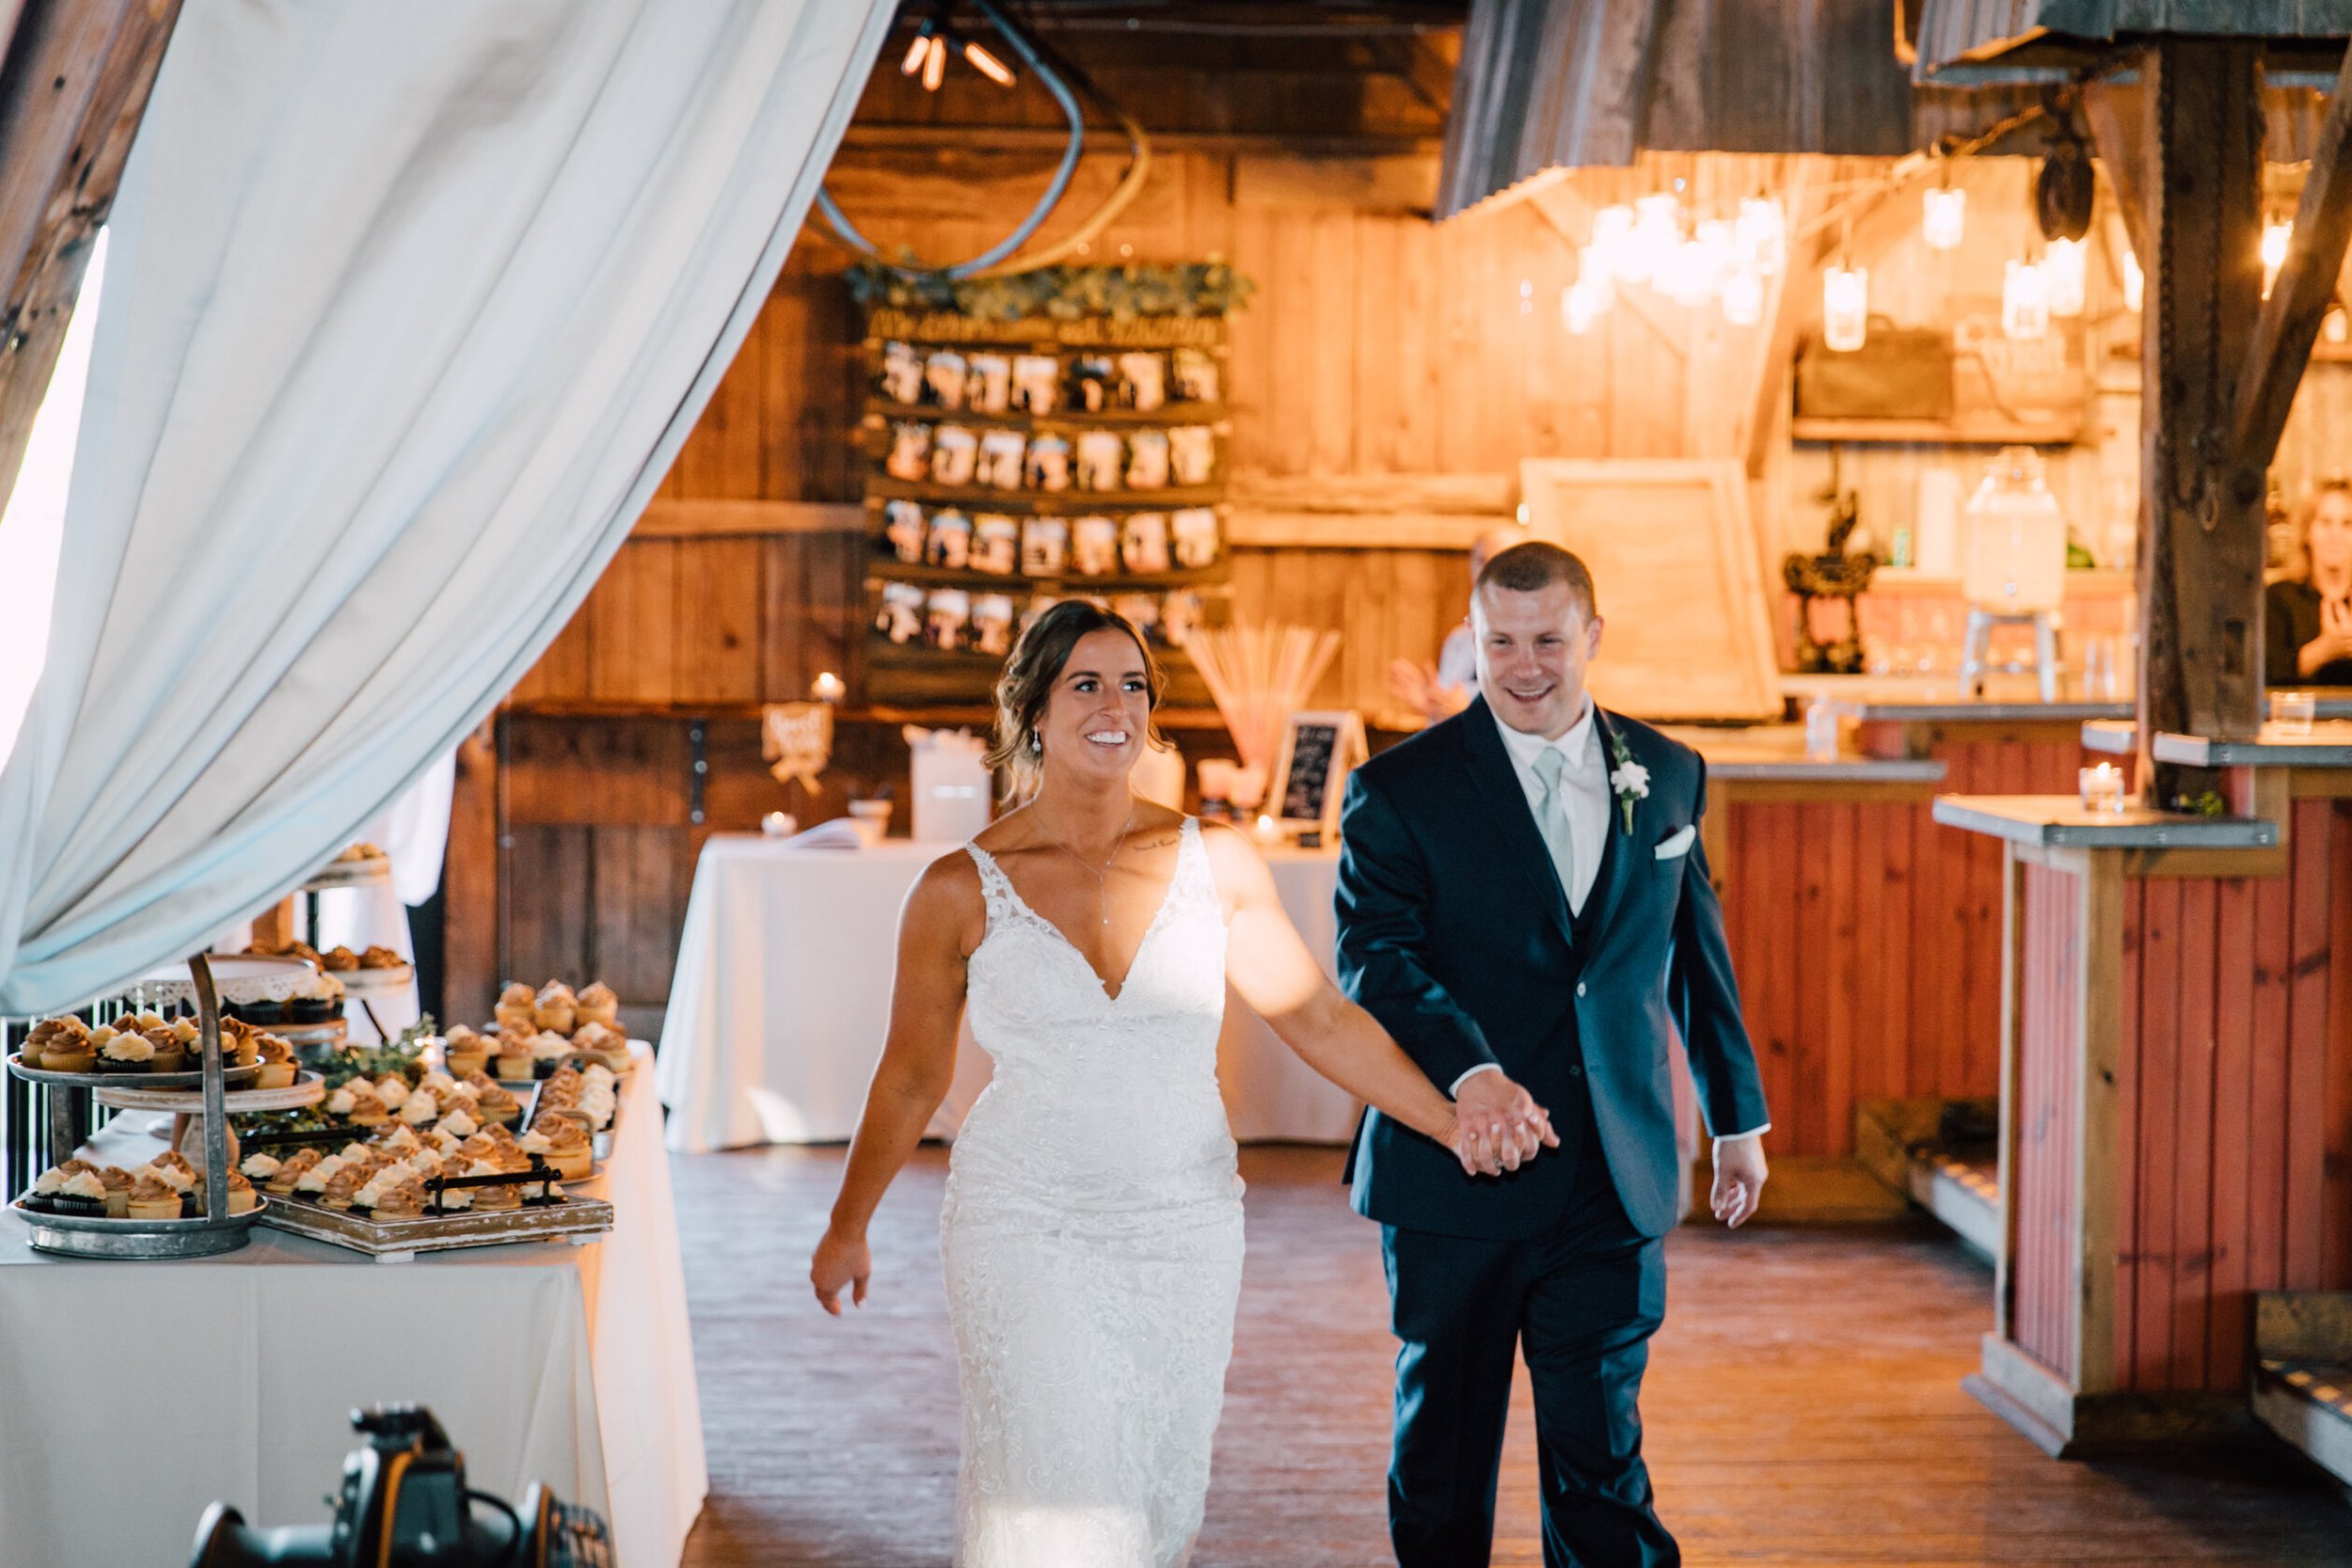  The bride and groom walk hand in hand as they are announced at their wedding reception at hayloft on the arch 